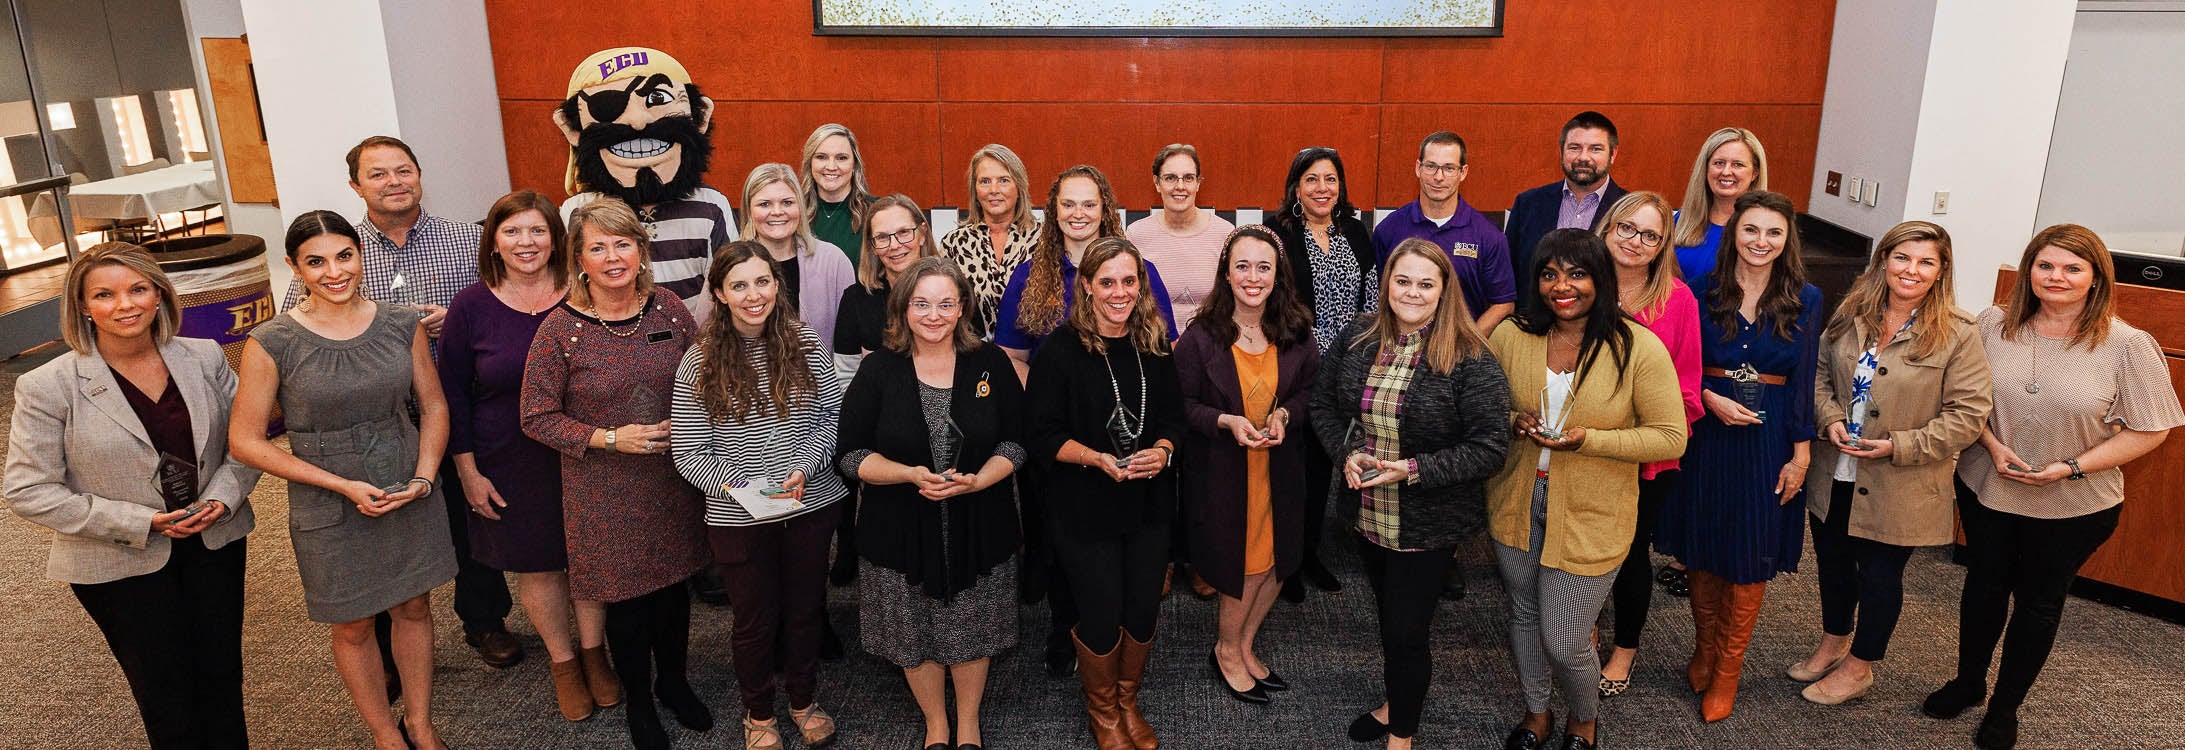 ECU faculty and staff were honored as 2022 Treasured Pirates during a ceremony in Harvey Hall on Wednesday.